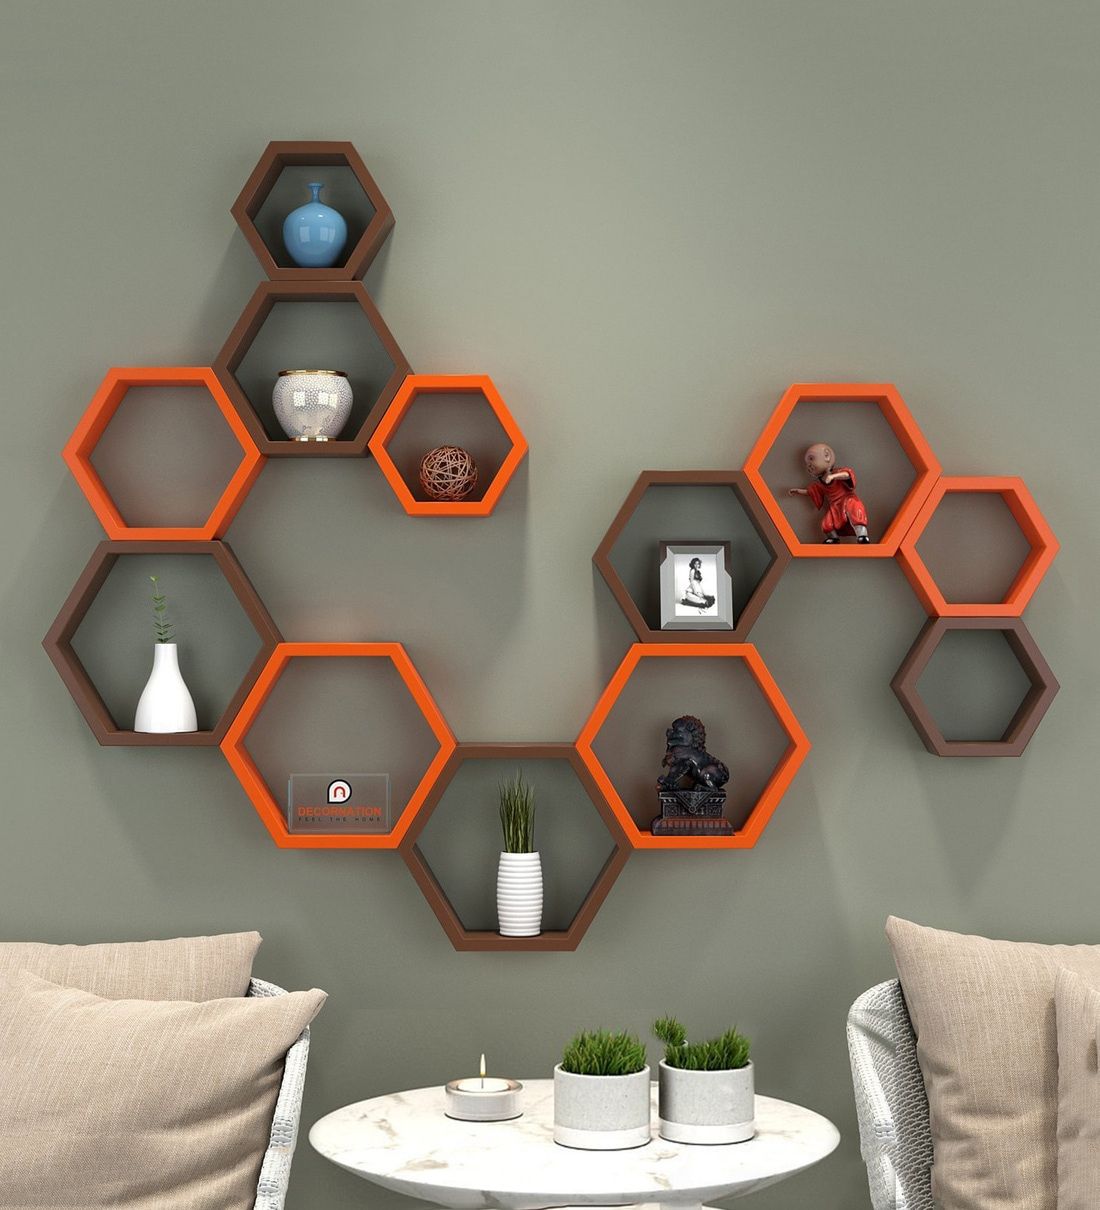 Buy Set Of 12 Engineered Wood Hexagon Shape Wall Shelf In Multicolour Intended For Most Up To Date Wall Art With Shelves (View 14 of 20)